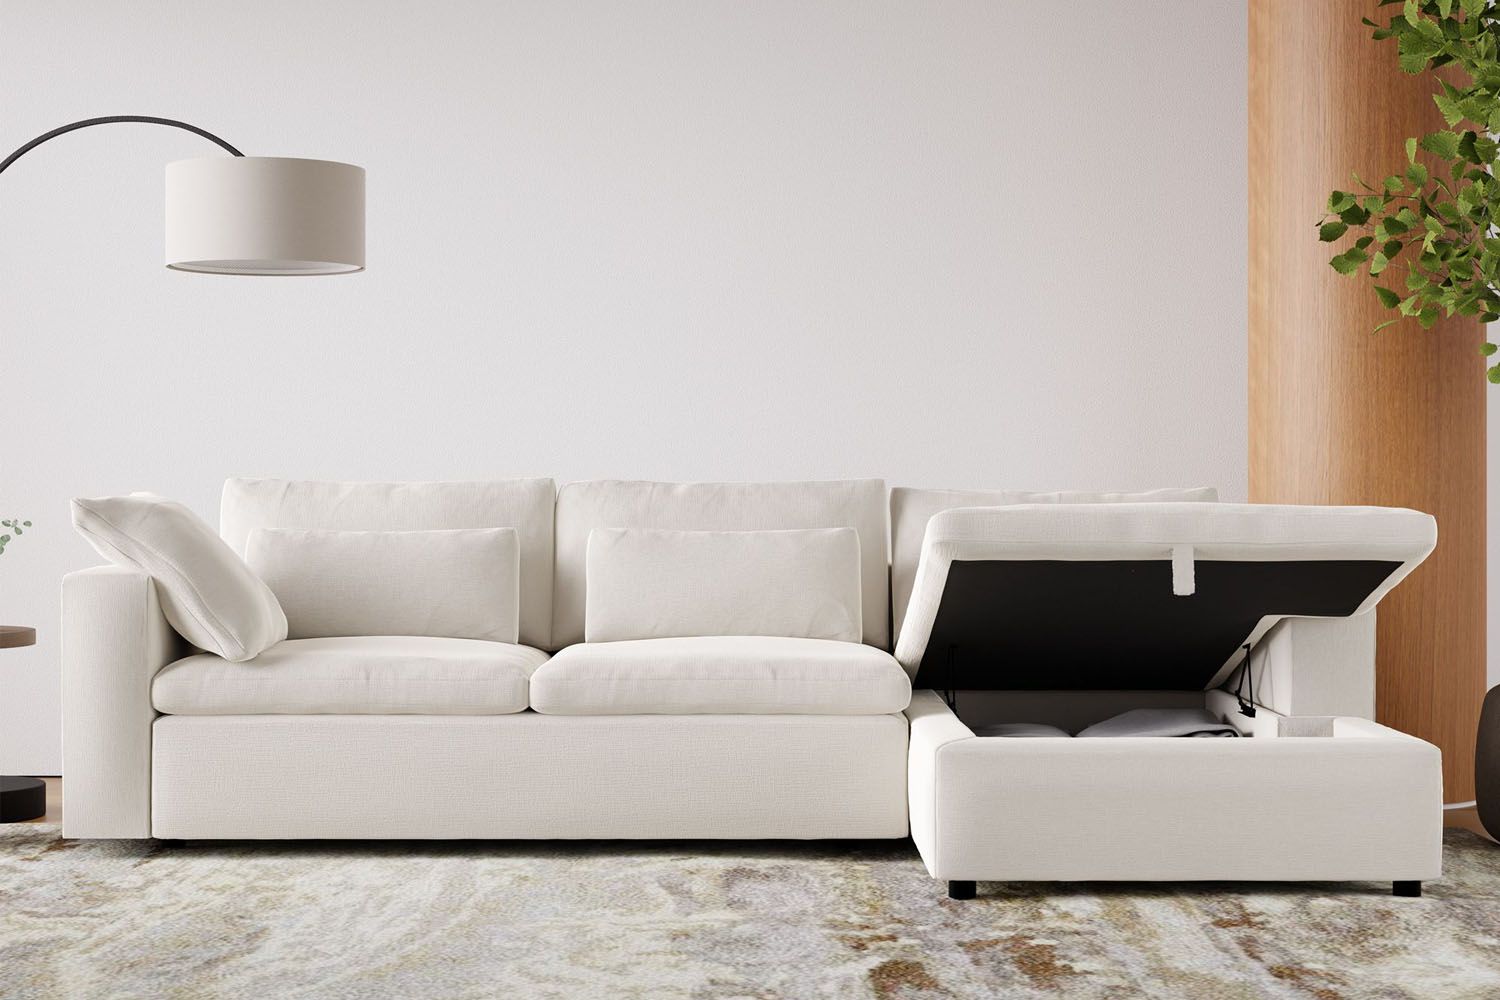 Sectional Sofas With Storage For Families: 10 Easy Pieces Intended For Sofa Sectionals With Storage (View 5 of 15)